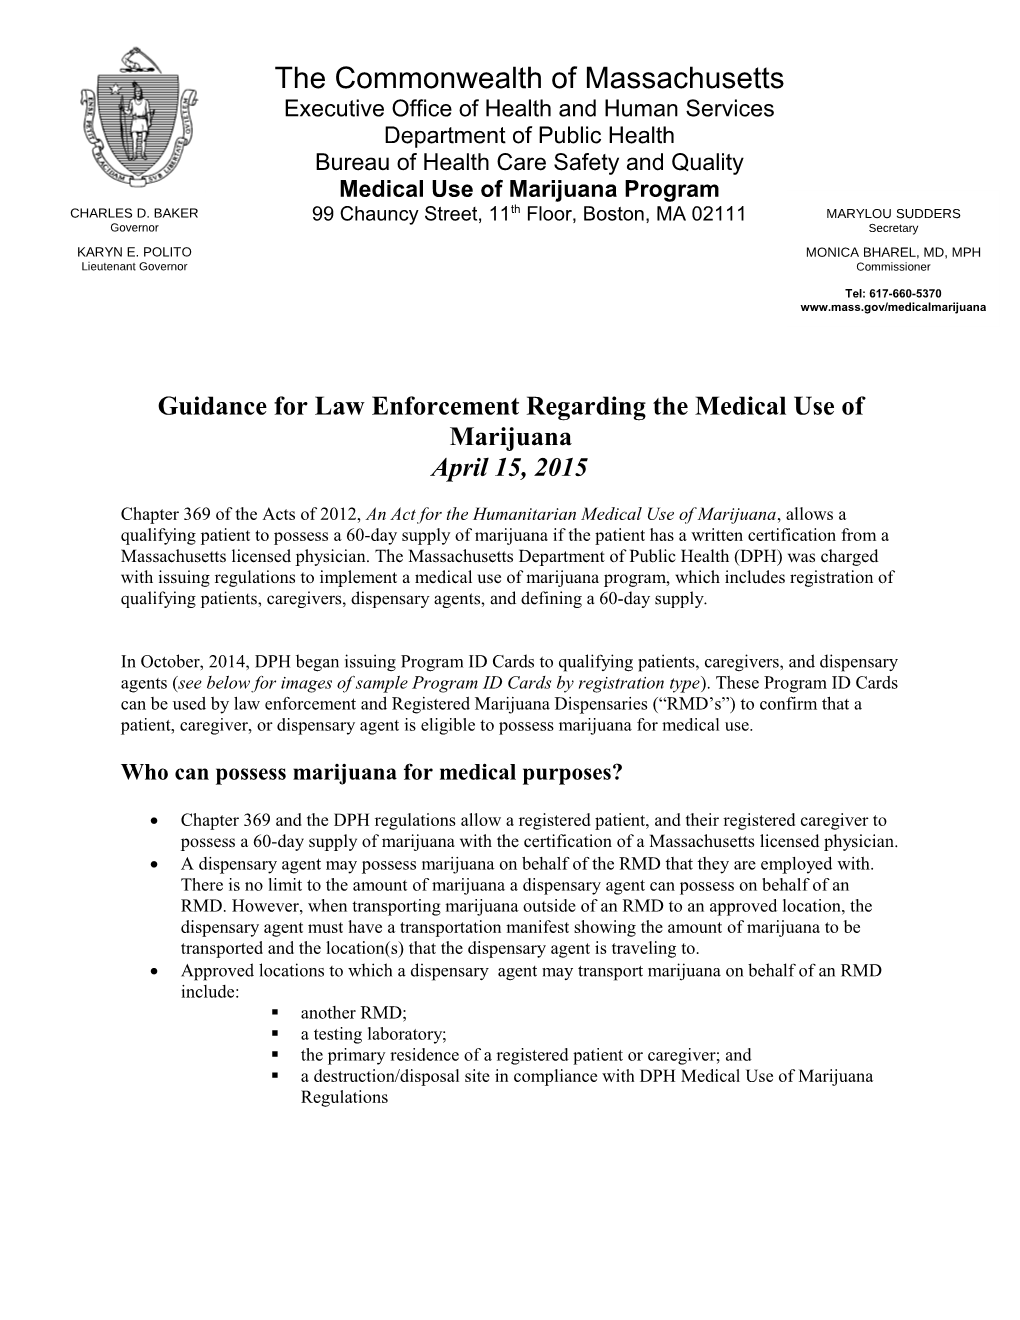 Guidance for Law Enforcement Regarding the Medical Use of Marijuana